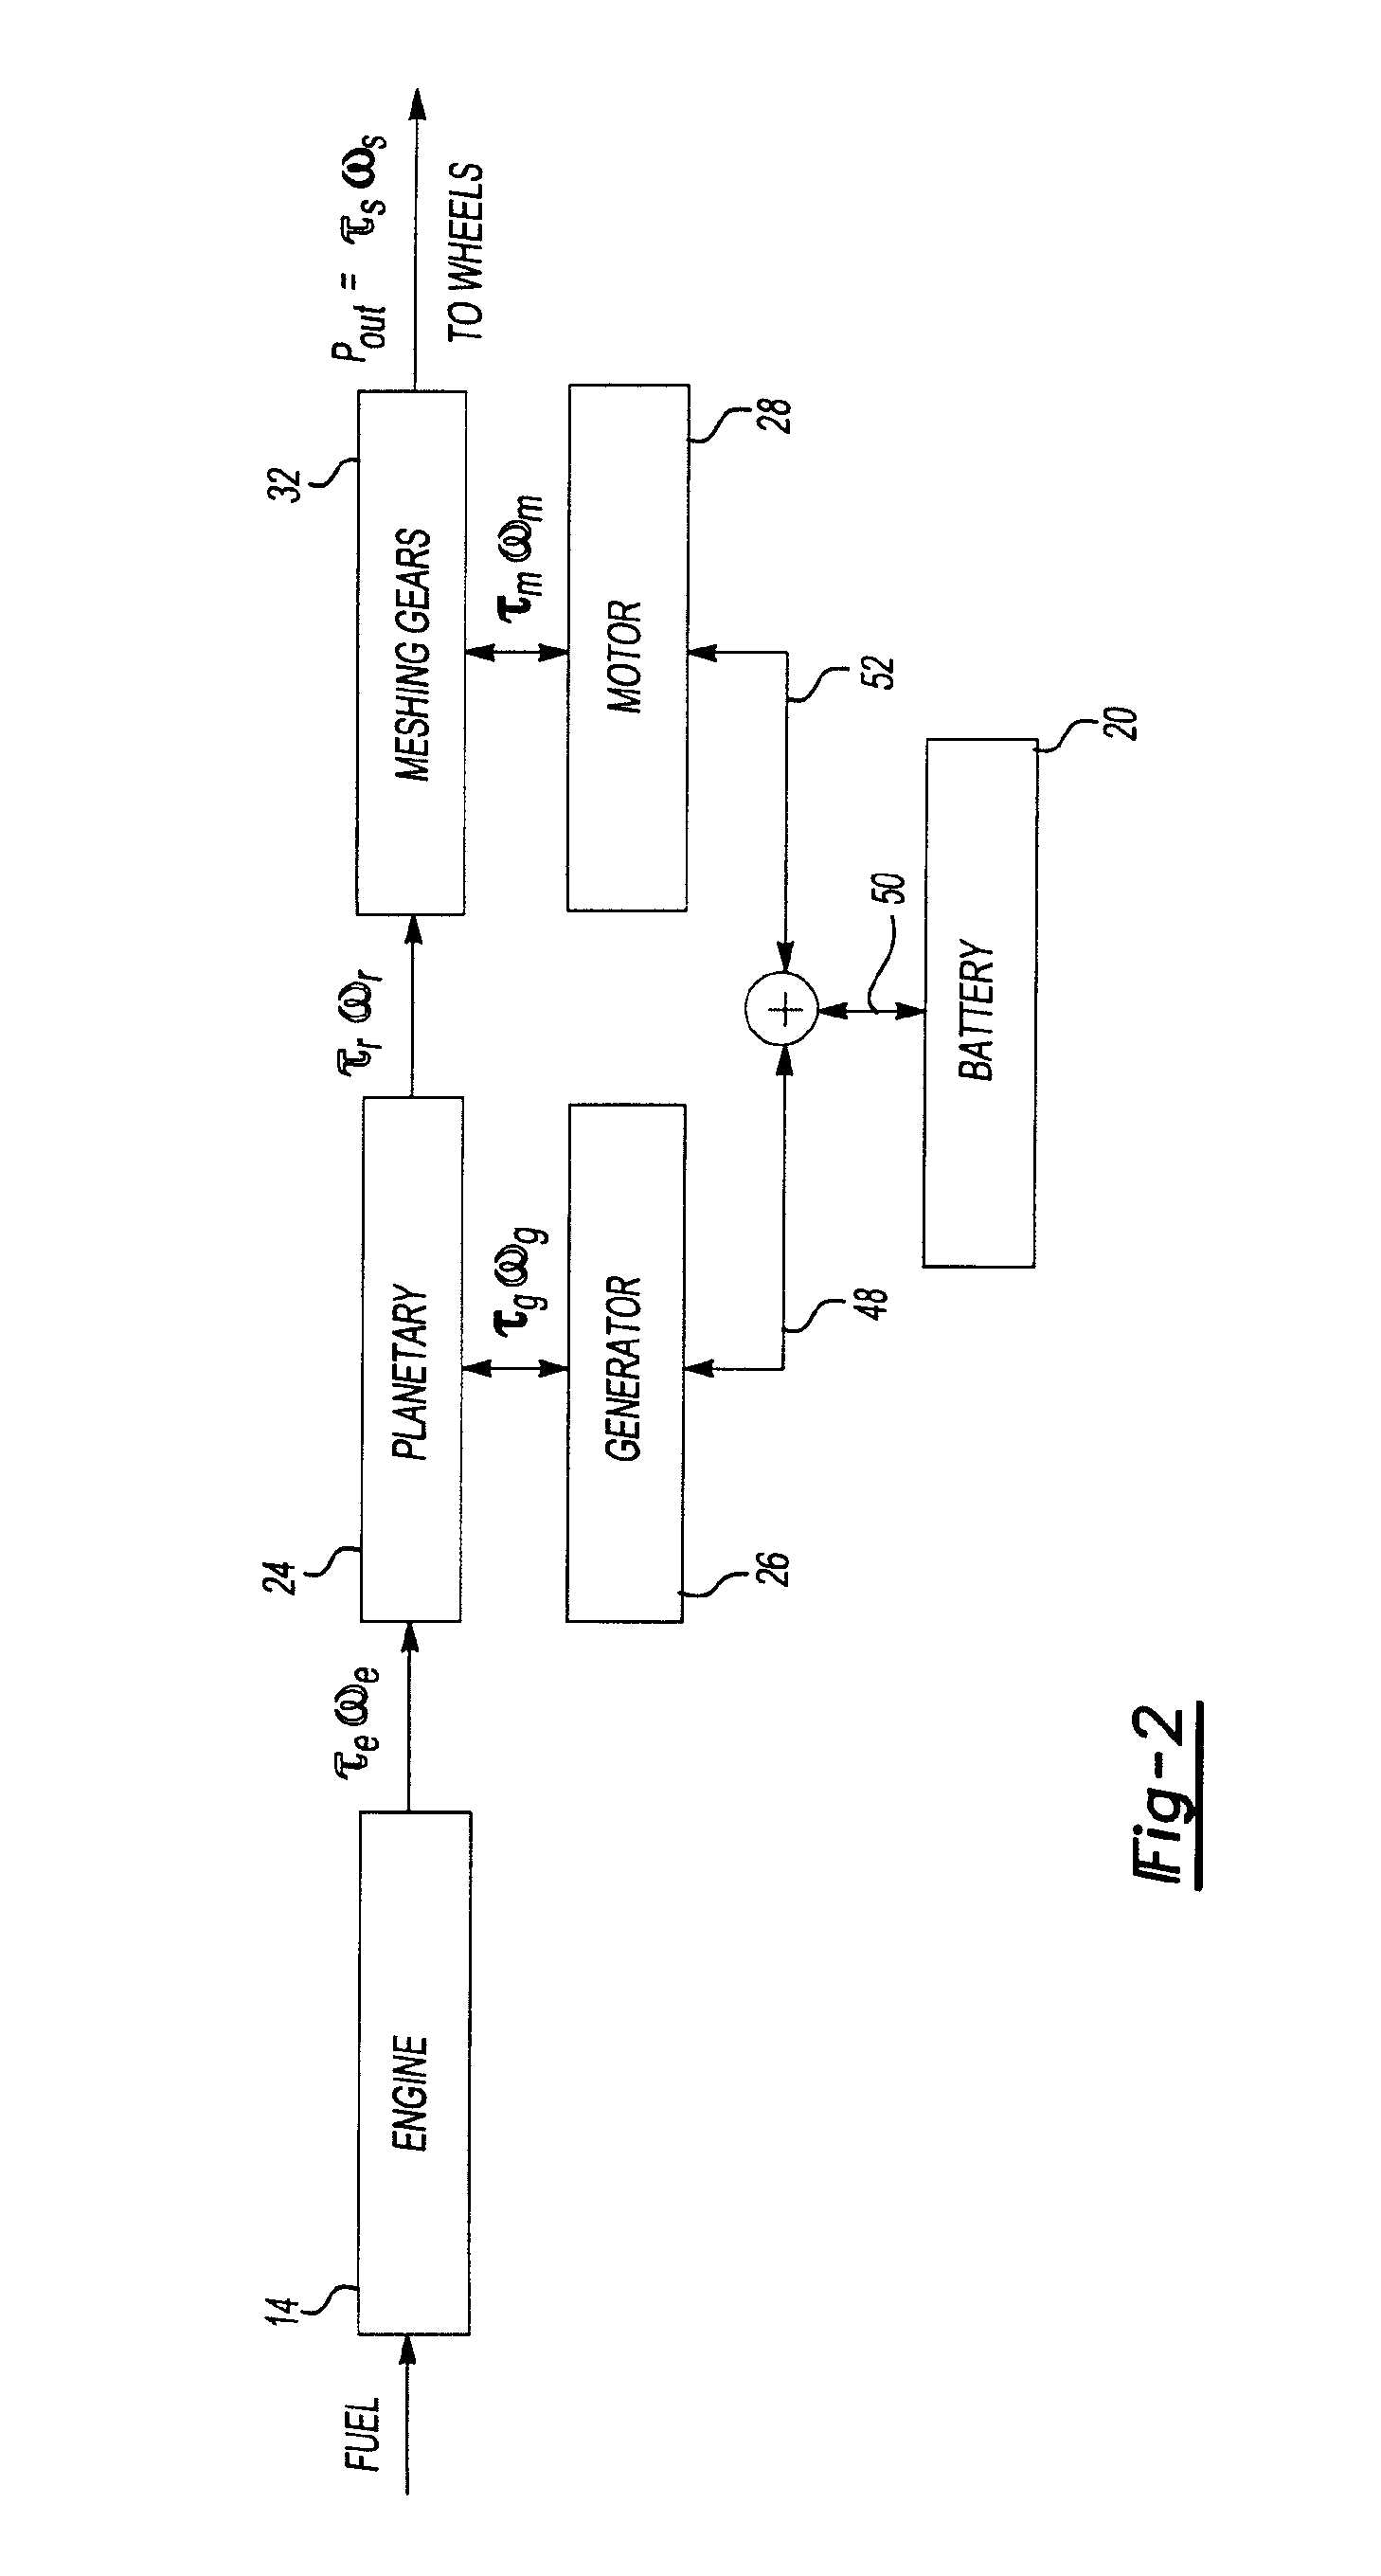 Method of operating a hybrid electric vehicle to limit noise, vibration, and harshness